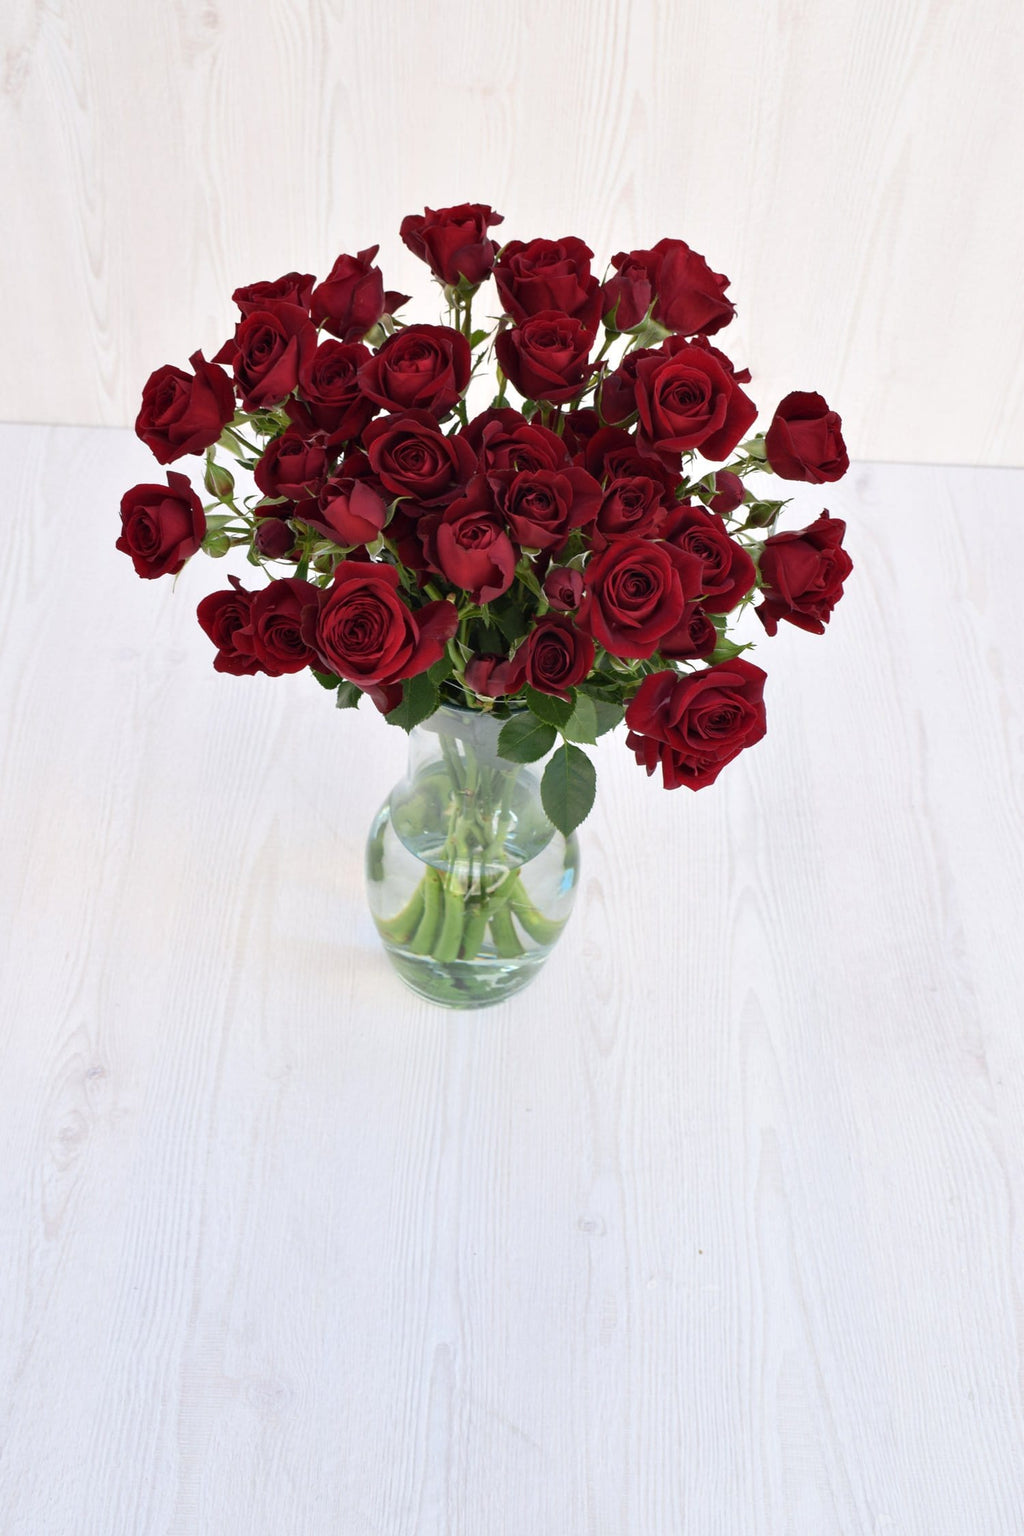 Buy Online High quality and Fresh Rubicon Spray Rose - Greenchoice Flowers